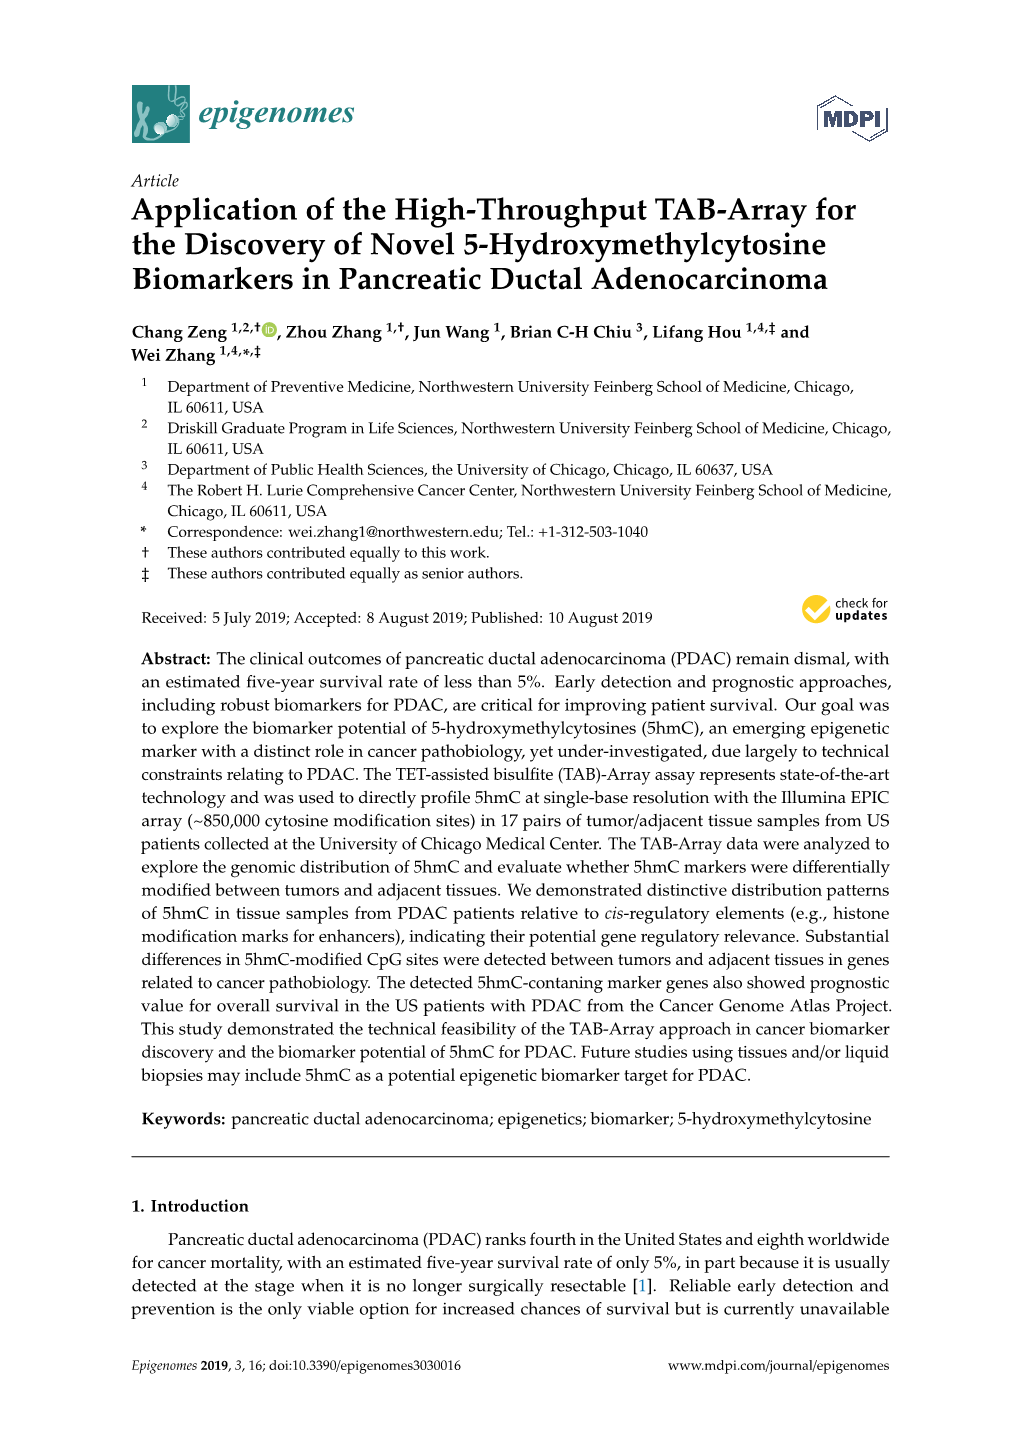 Application of the High-Throughput TAB-Array for the Discovery of Novel 5-Hydroxymethylcytosine Biomarkers in Pancreatic Ductal Adenocarcinoma